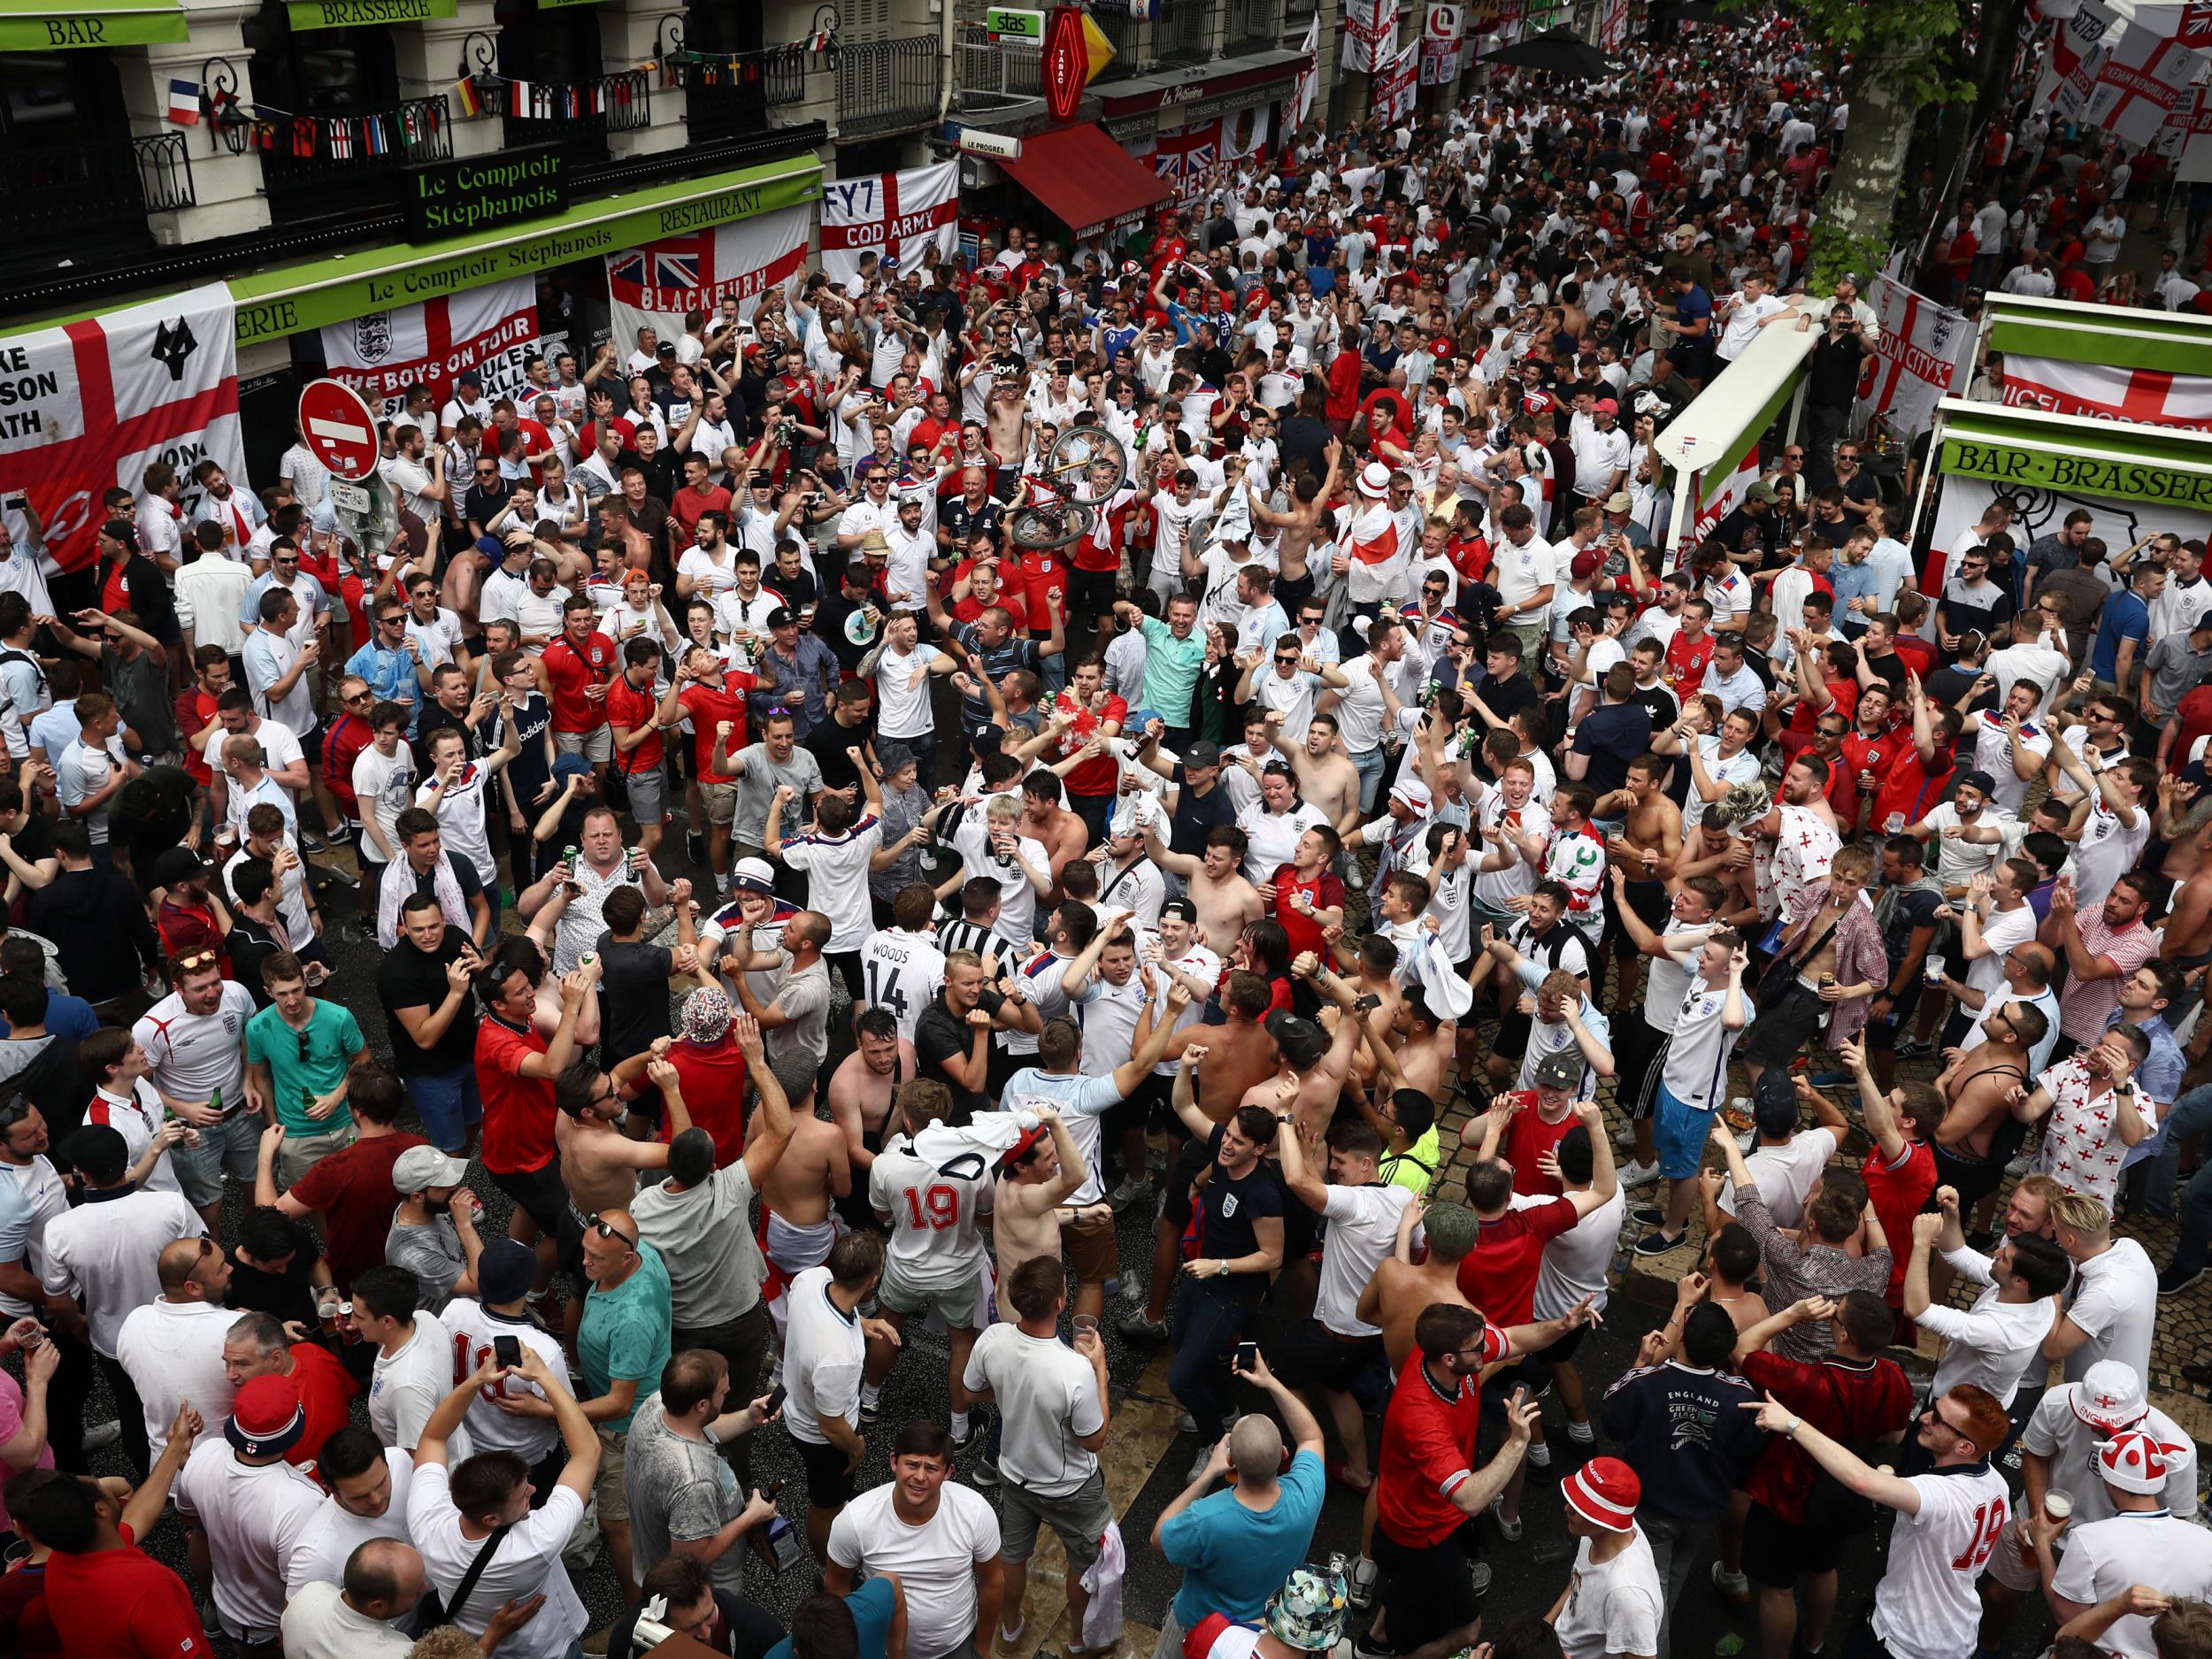 England fans at the 2016 European Championships in Saint-Etienne, France